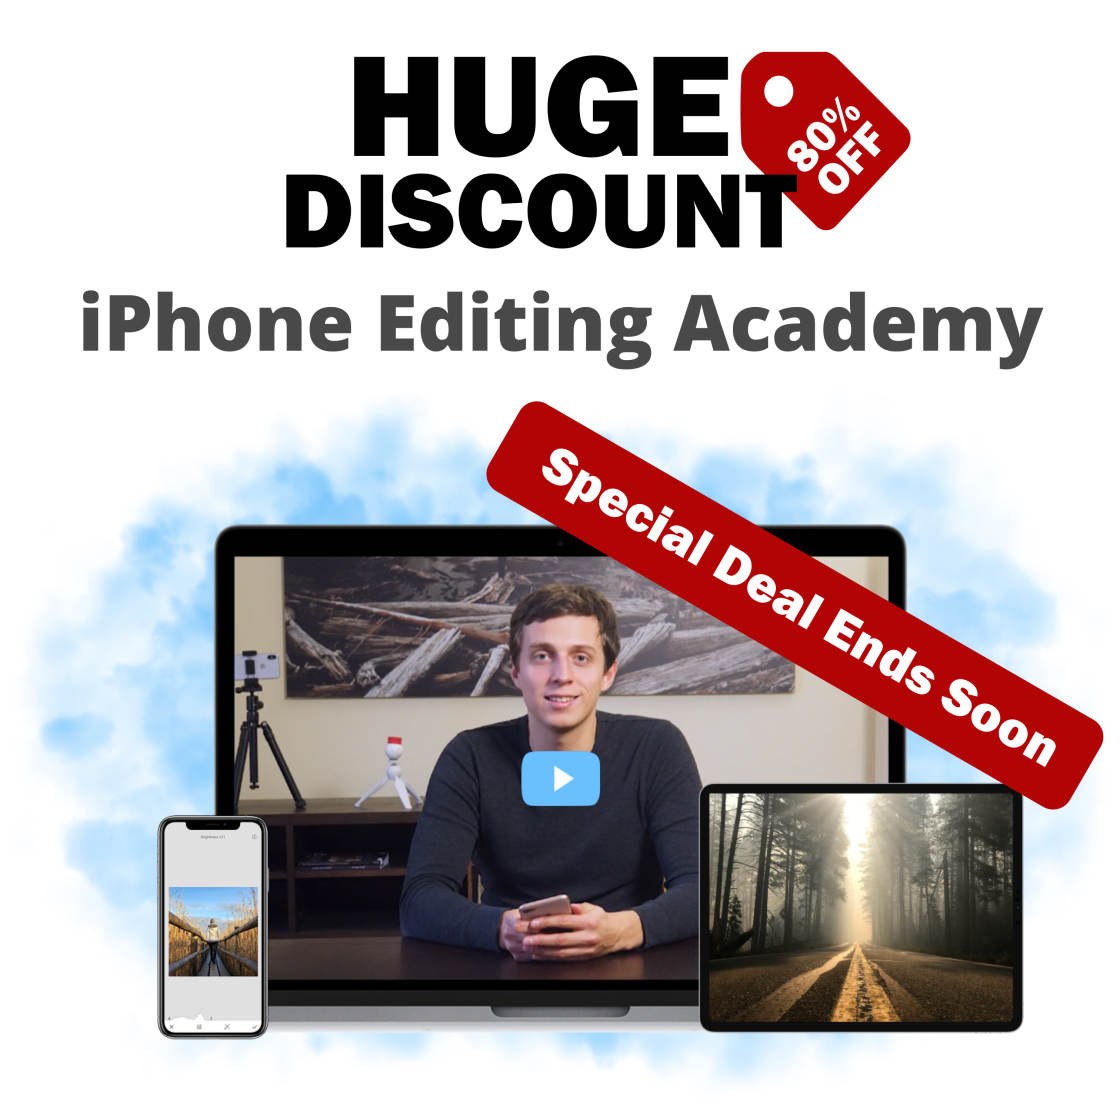 iPhone Editing Academy Discount